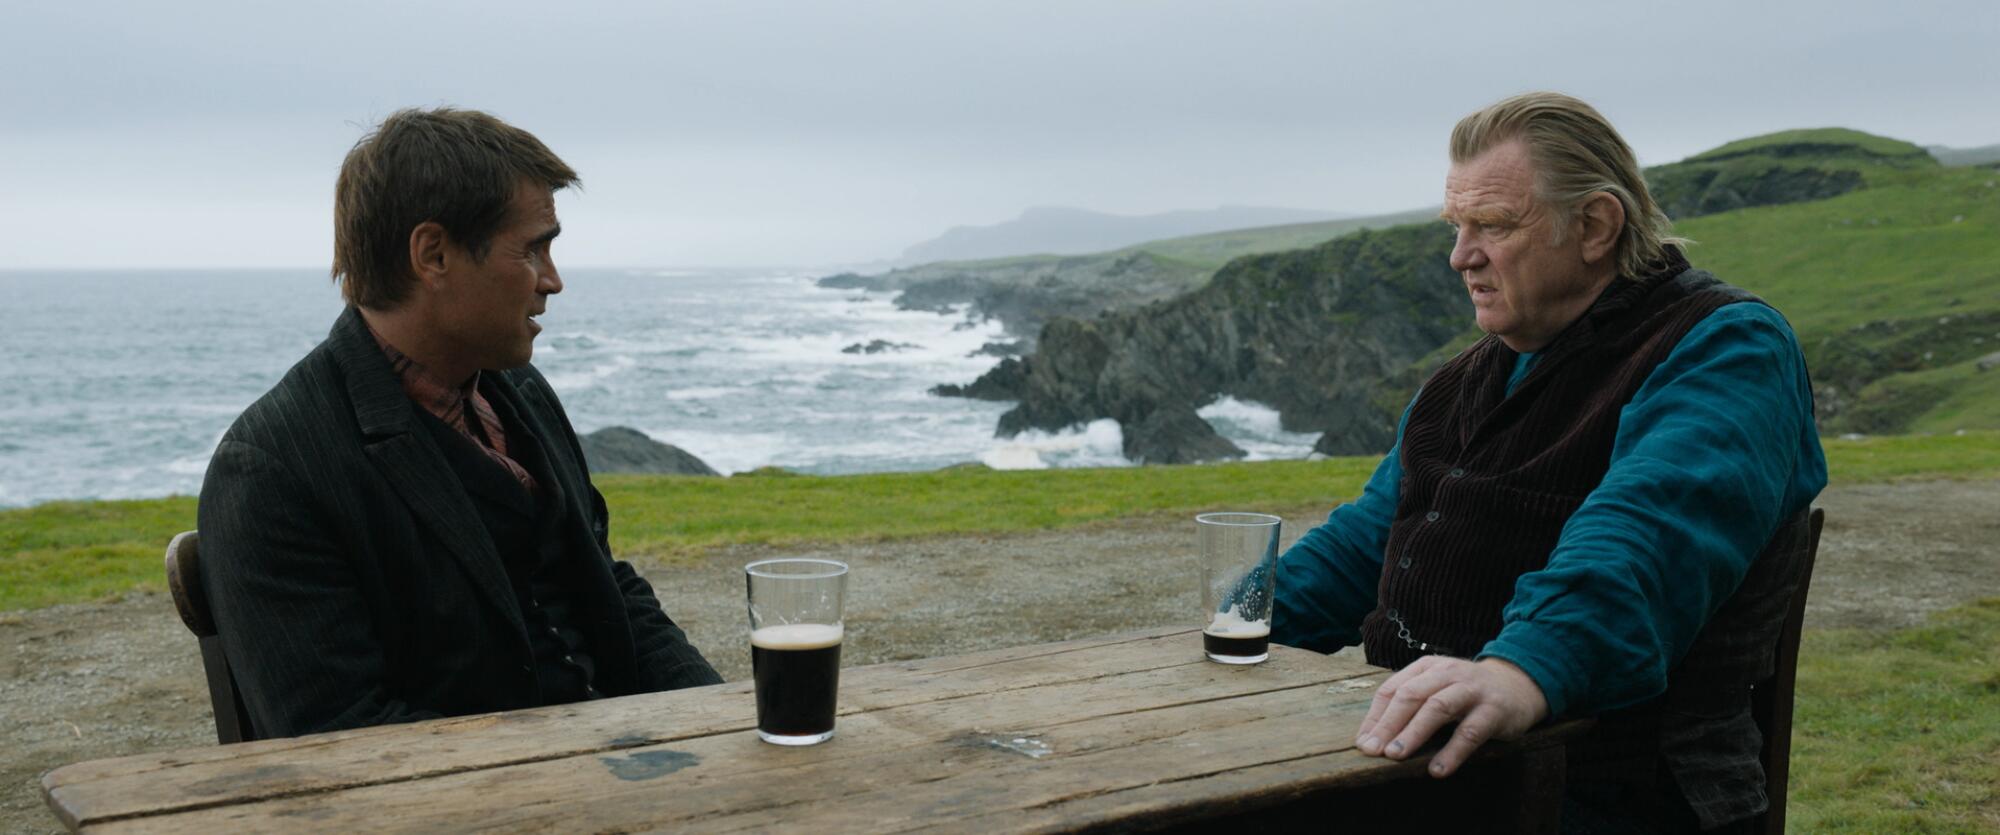 two men at a wooden table with beers by the sea 